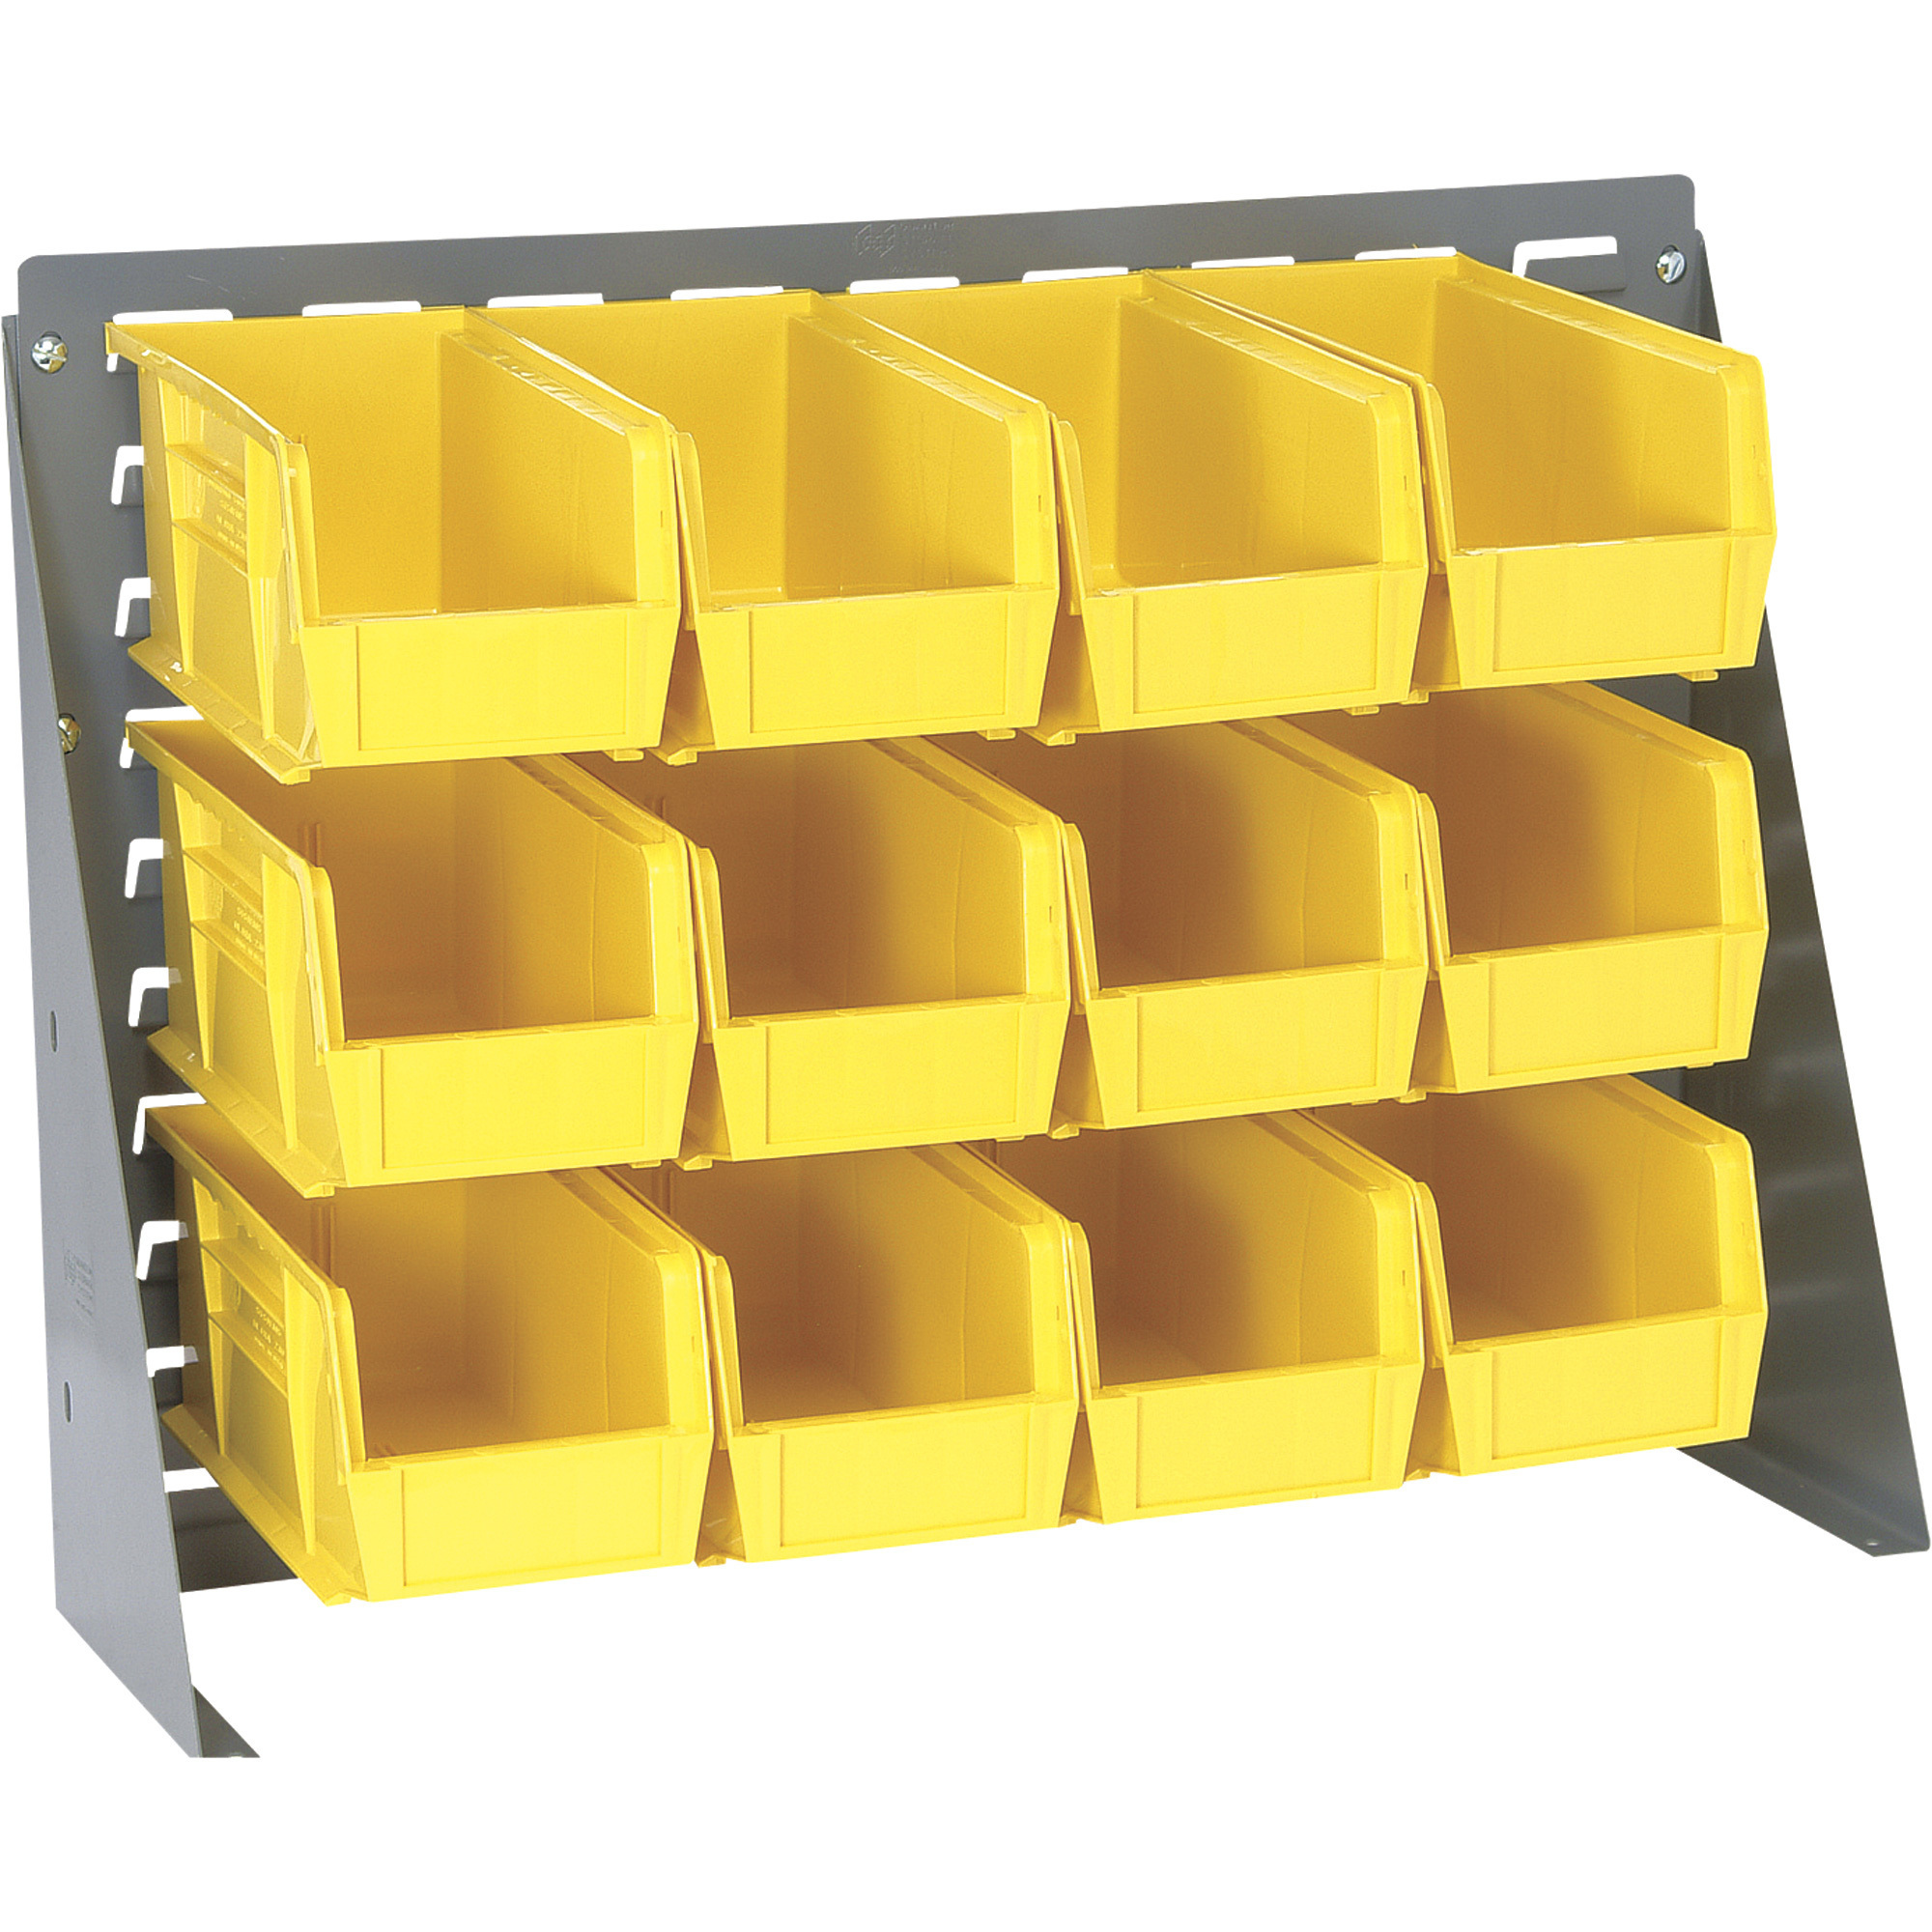 Quantum Storage Louvered Panel Bench Rack with 12 Bins, 27Inch L x 8Inch W x 21Inch H, Yellow, QBR272123012Y